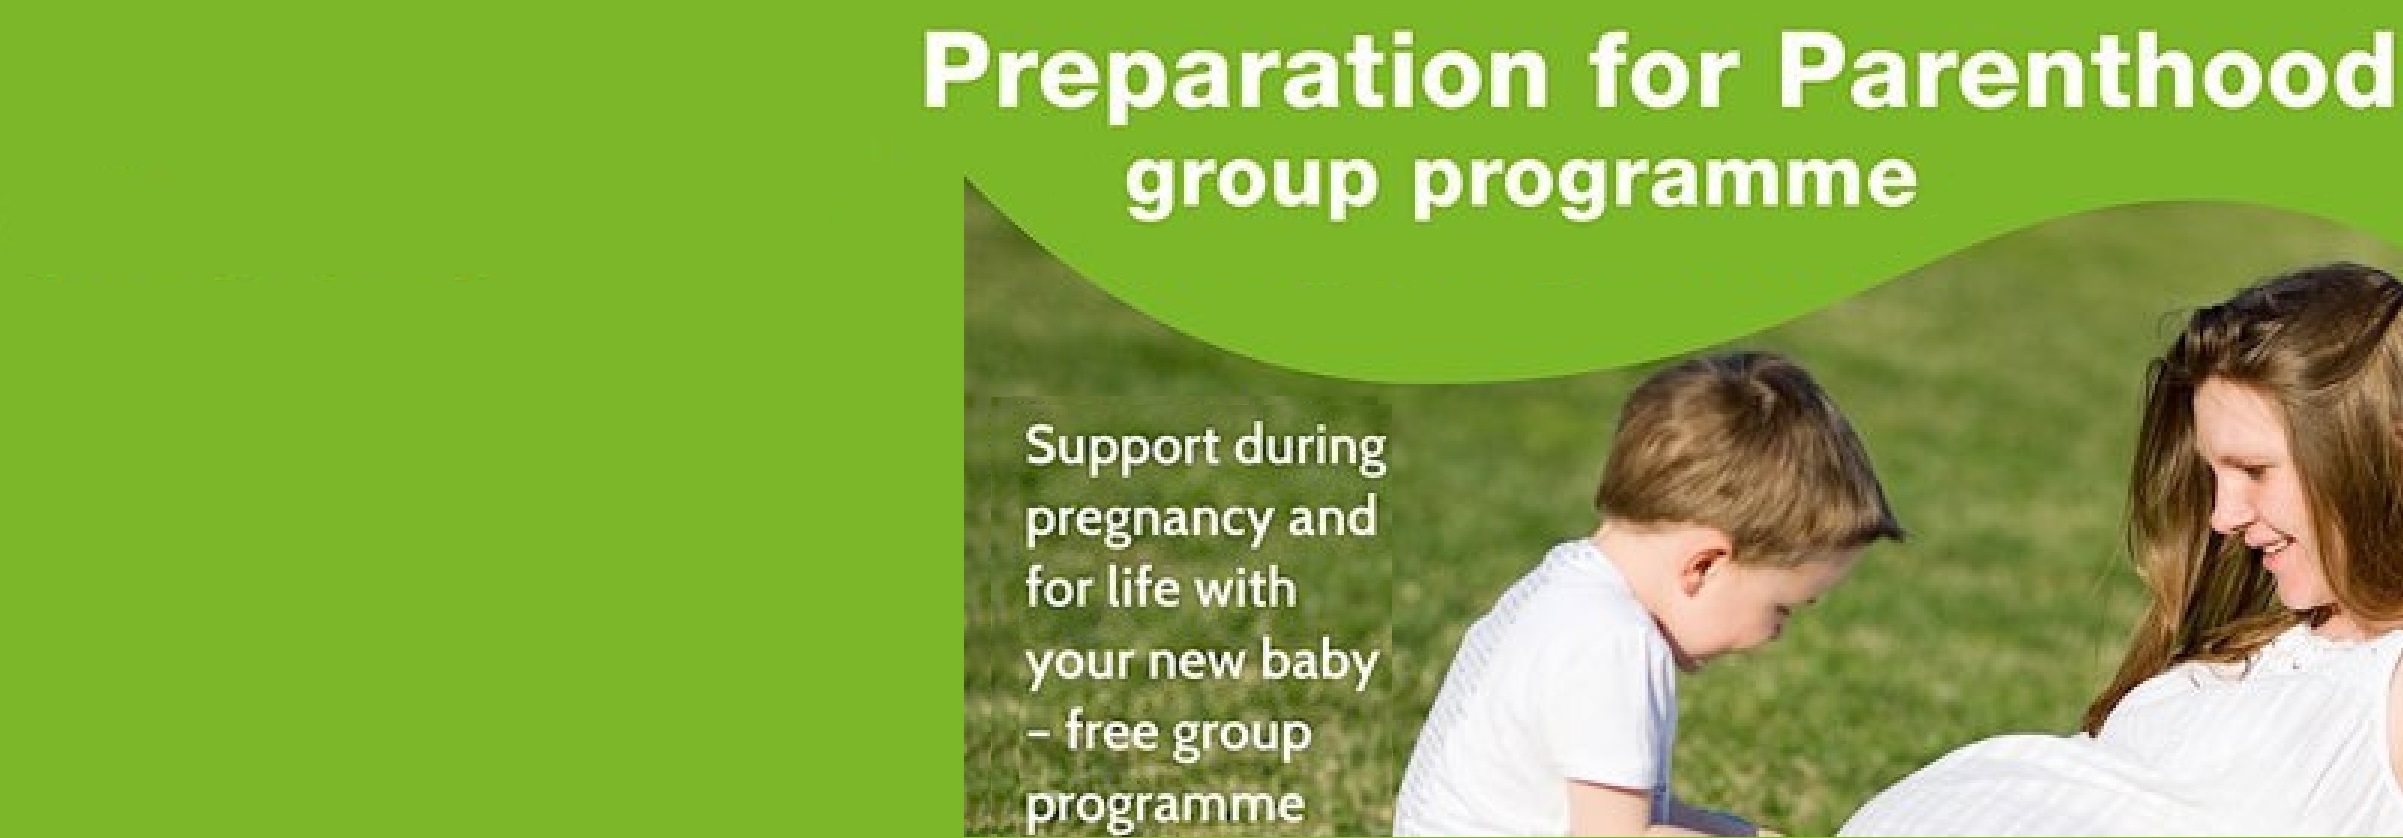 preparation for parenthood group programme, support for pregnancy and for life with your new baby - free group programme